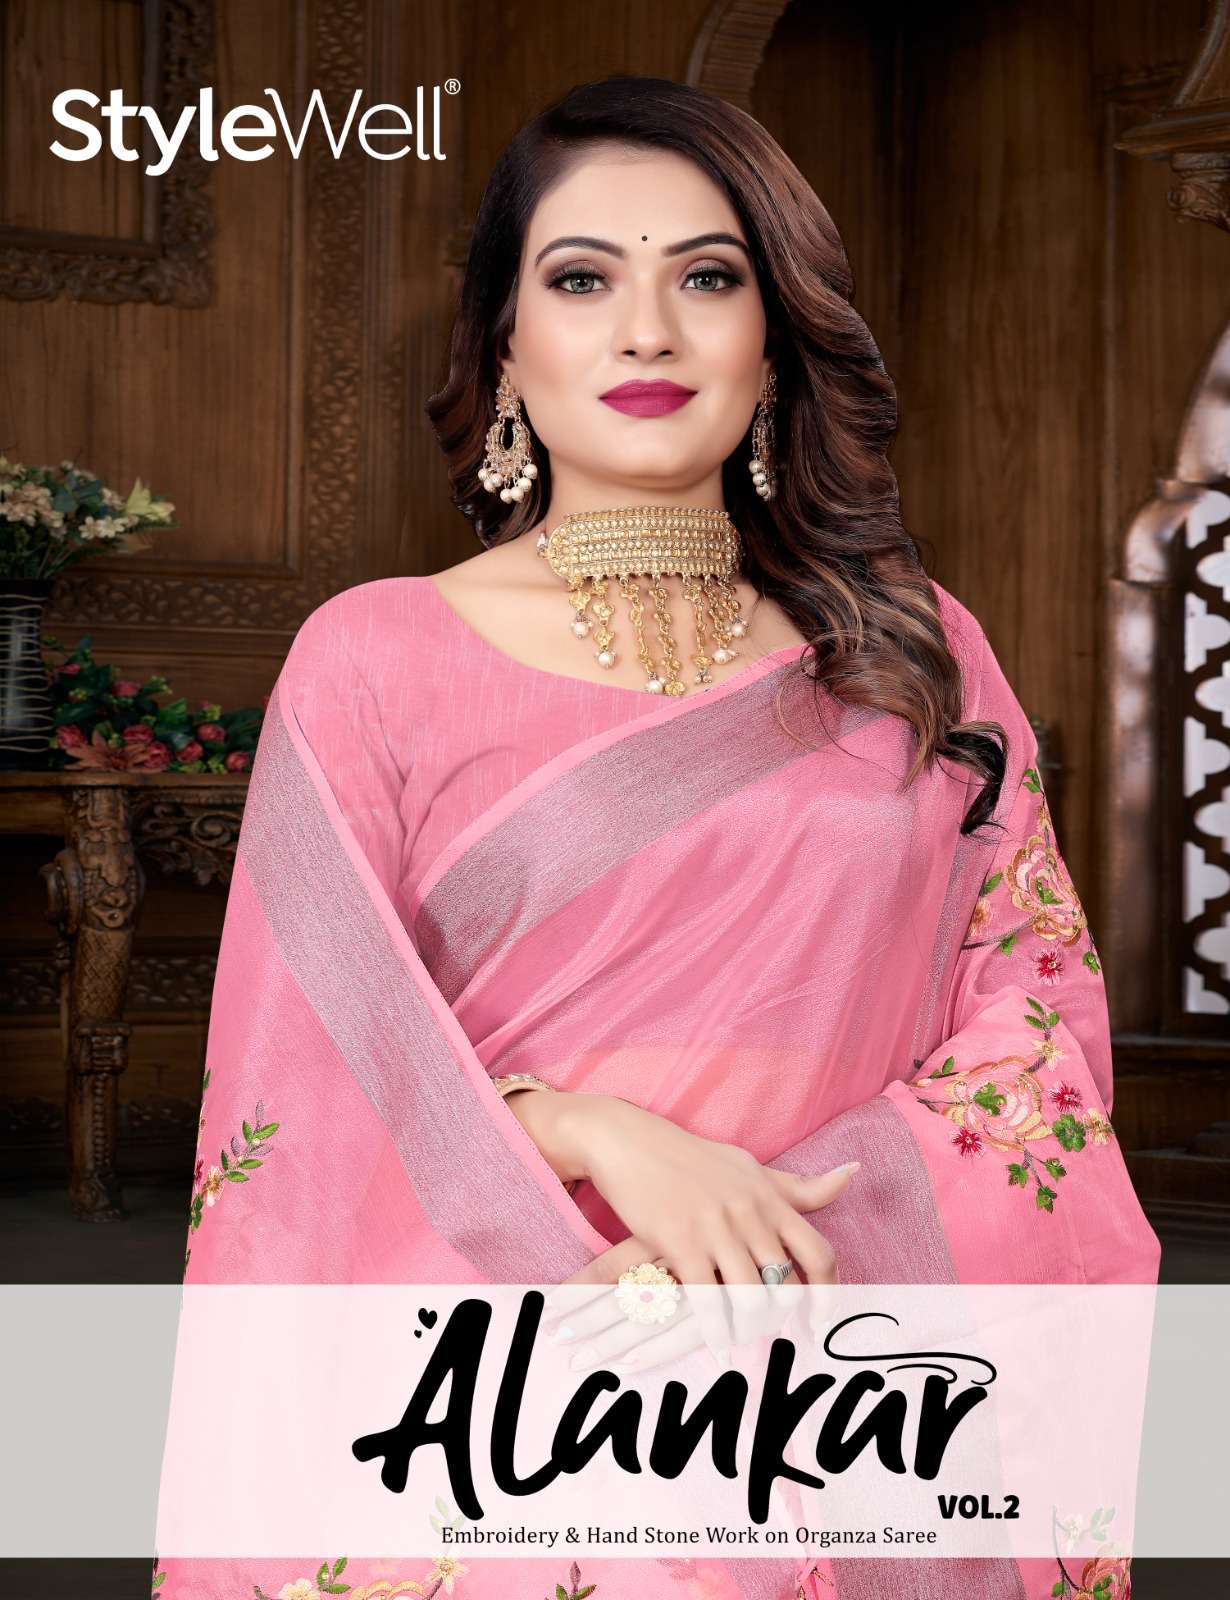 alankar vol 2 by stylewell beautiful flower print saree collection